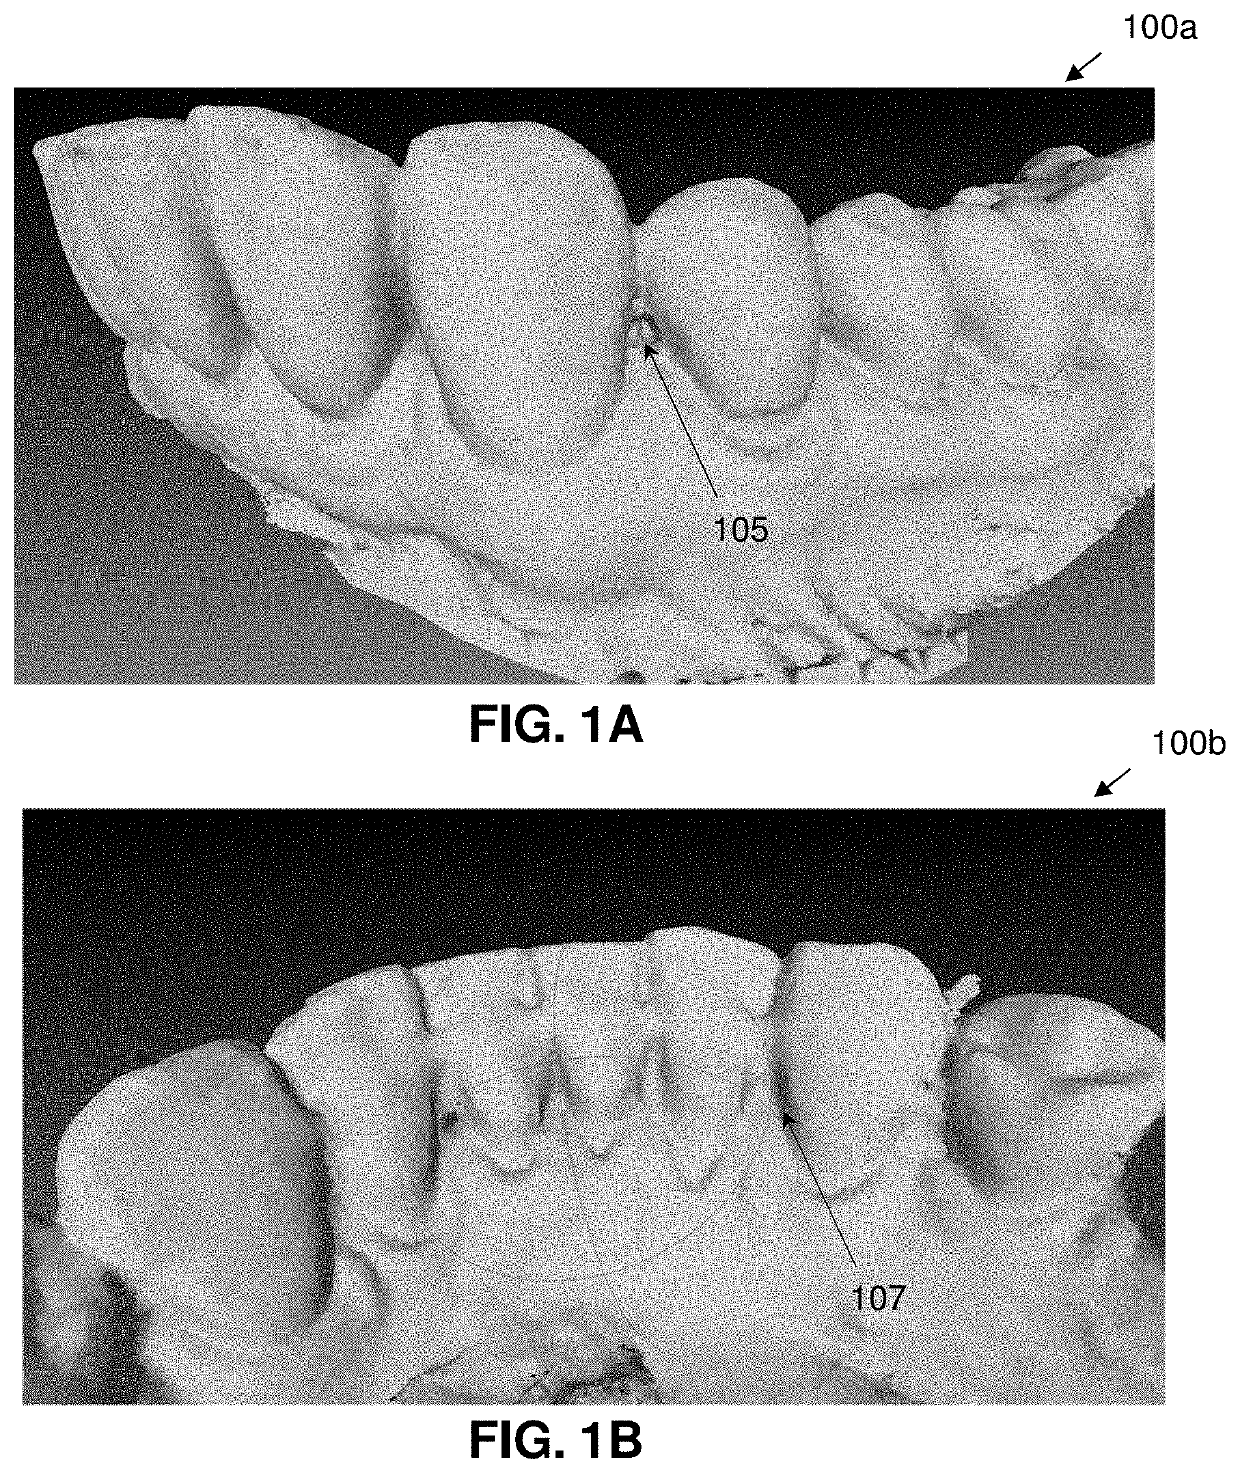 Artificially intelligent systems to manage virtual dental models using dental images